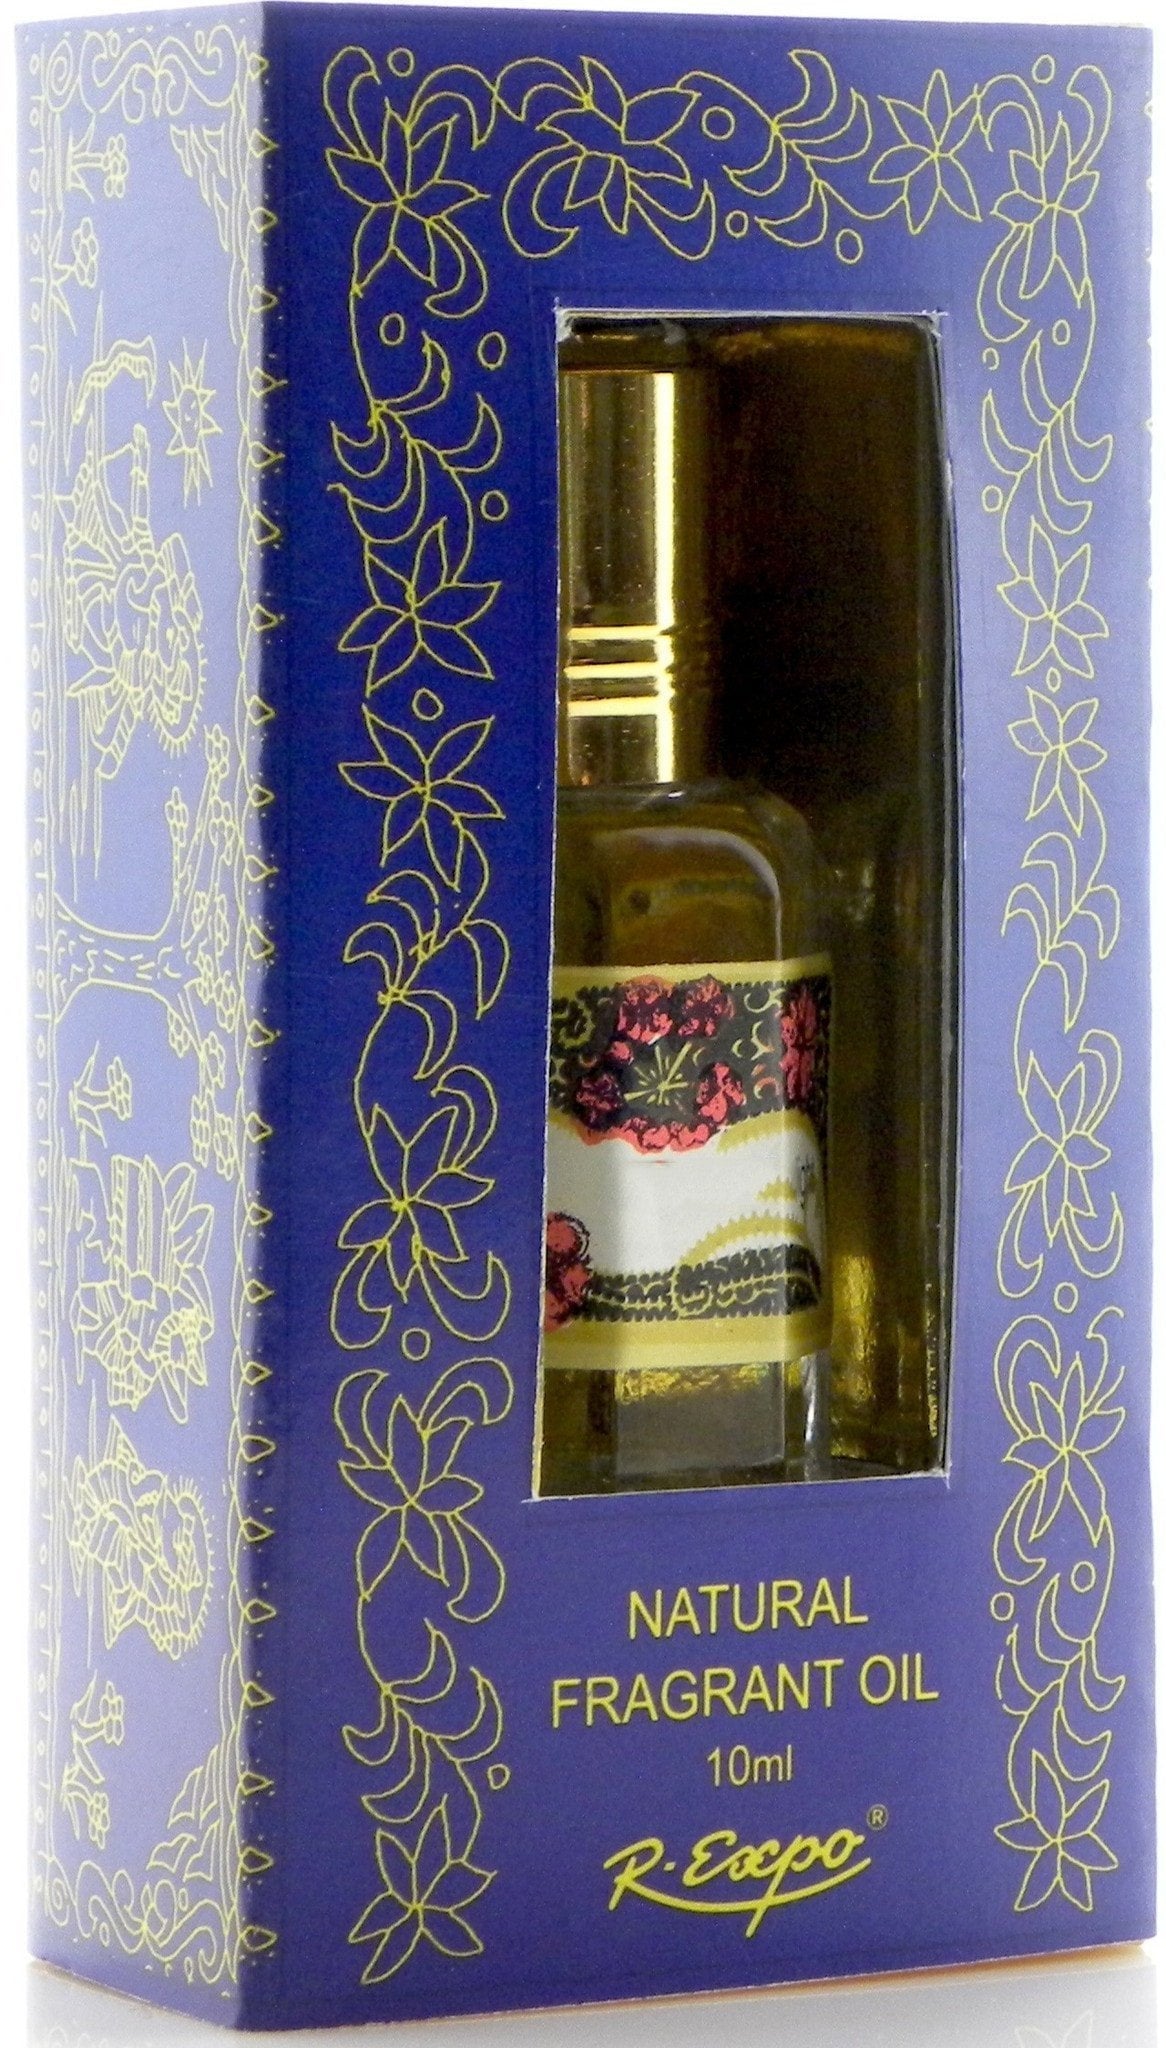 Song Of India - Night Queen Perfume Oil - Aged Indian Fragrance Oil